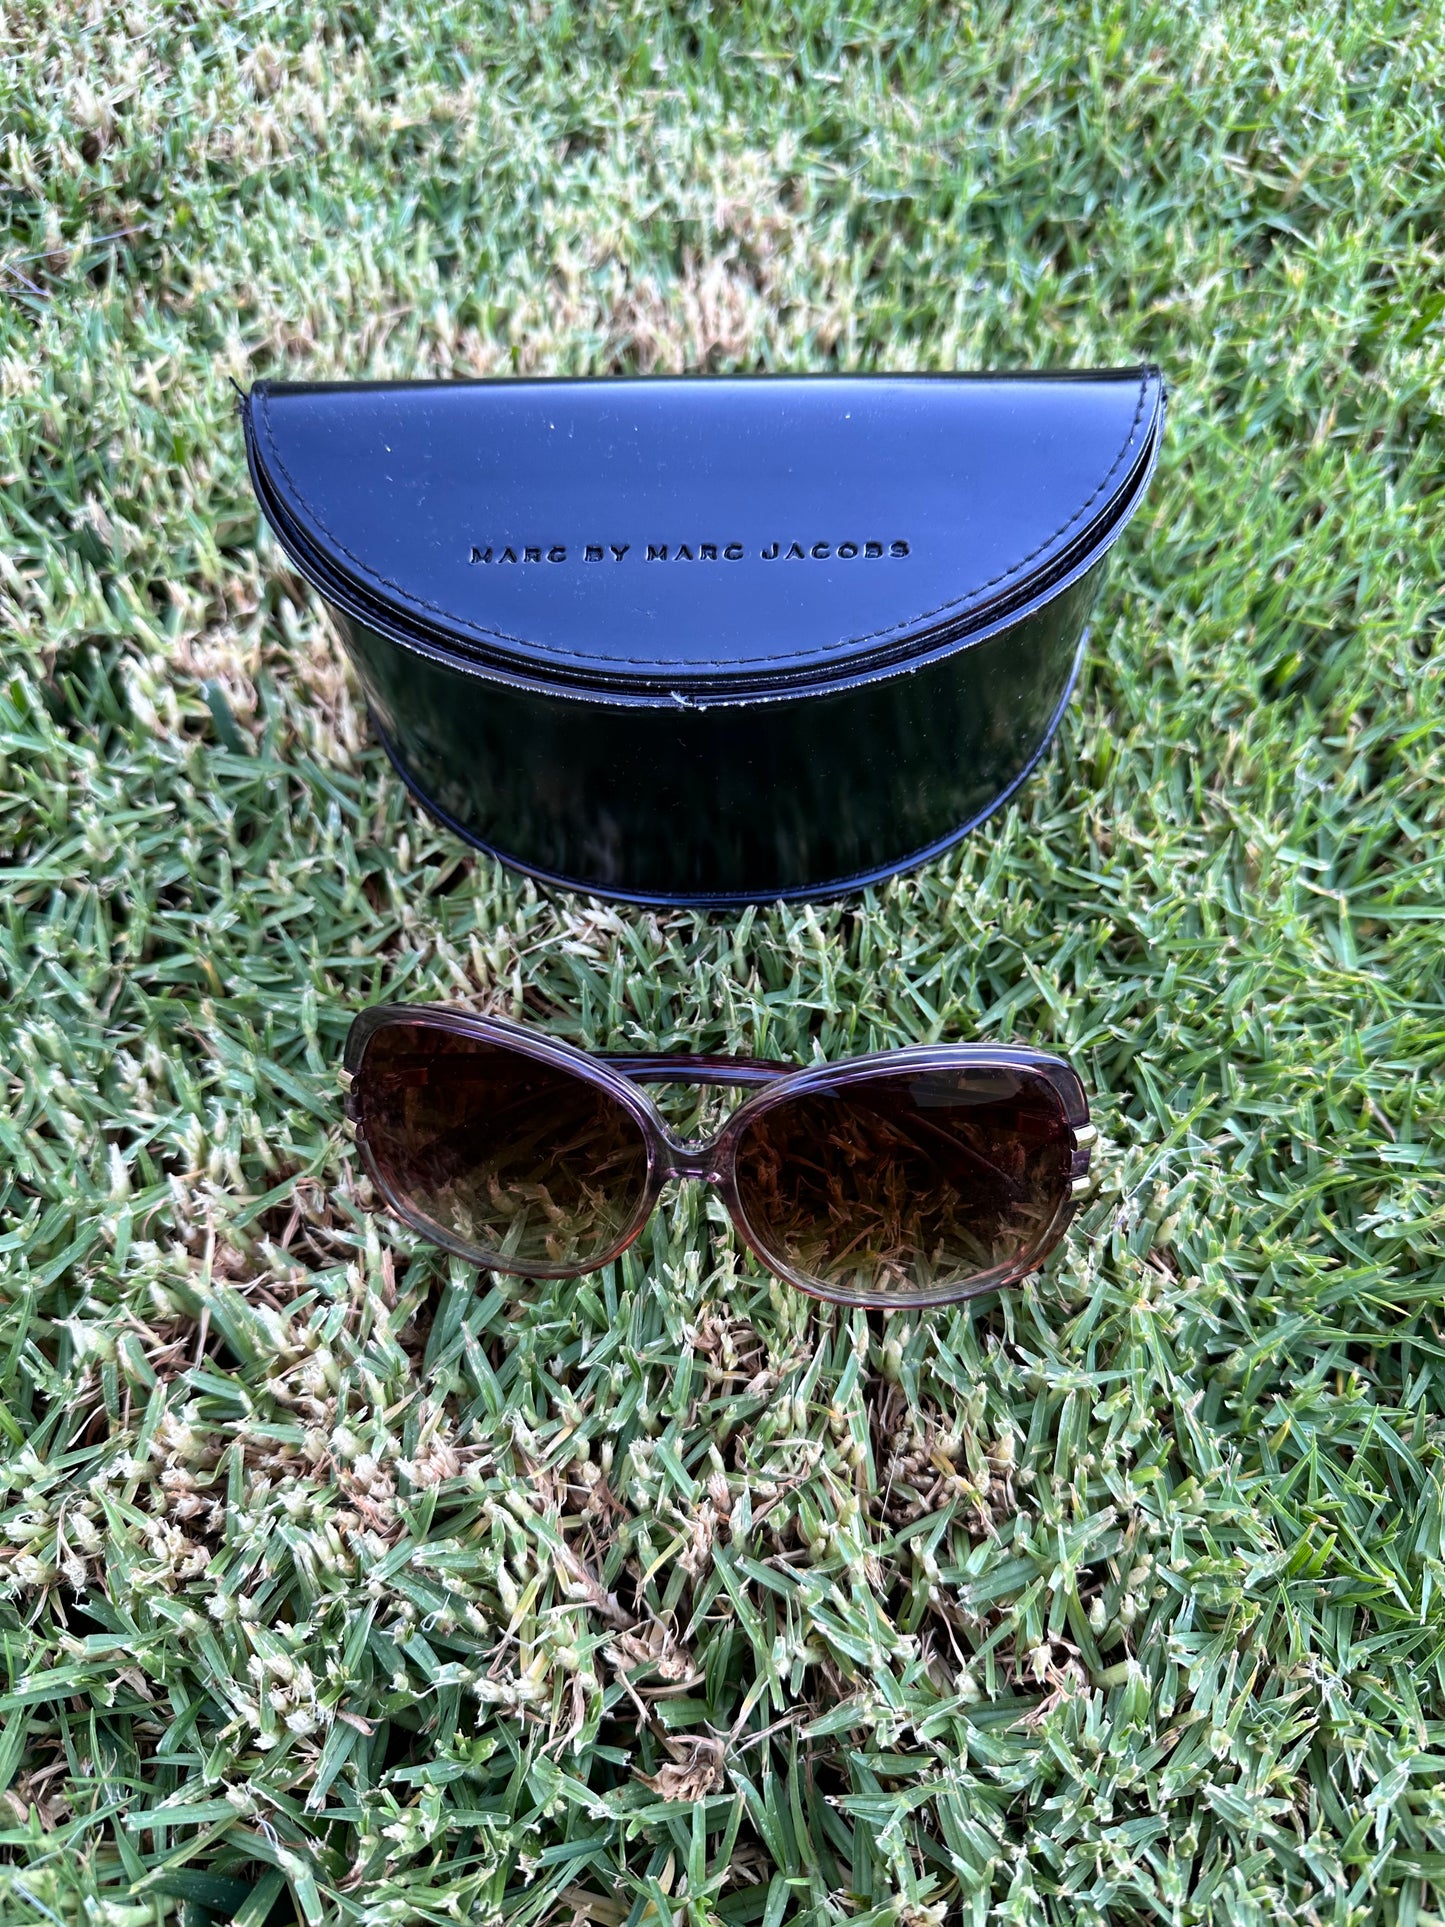 SHADES OF BLUE: Harlee's Marc by Marc Jacobs Sunglasses